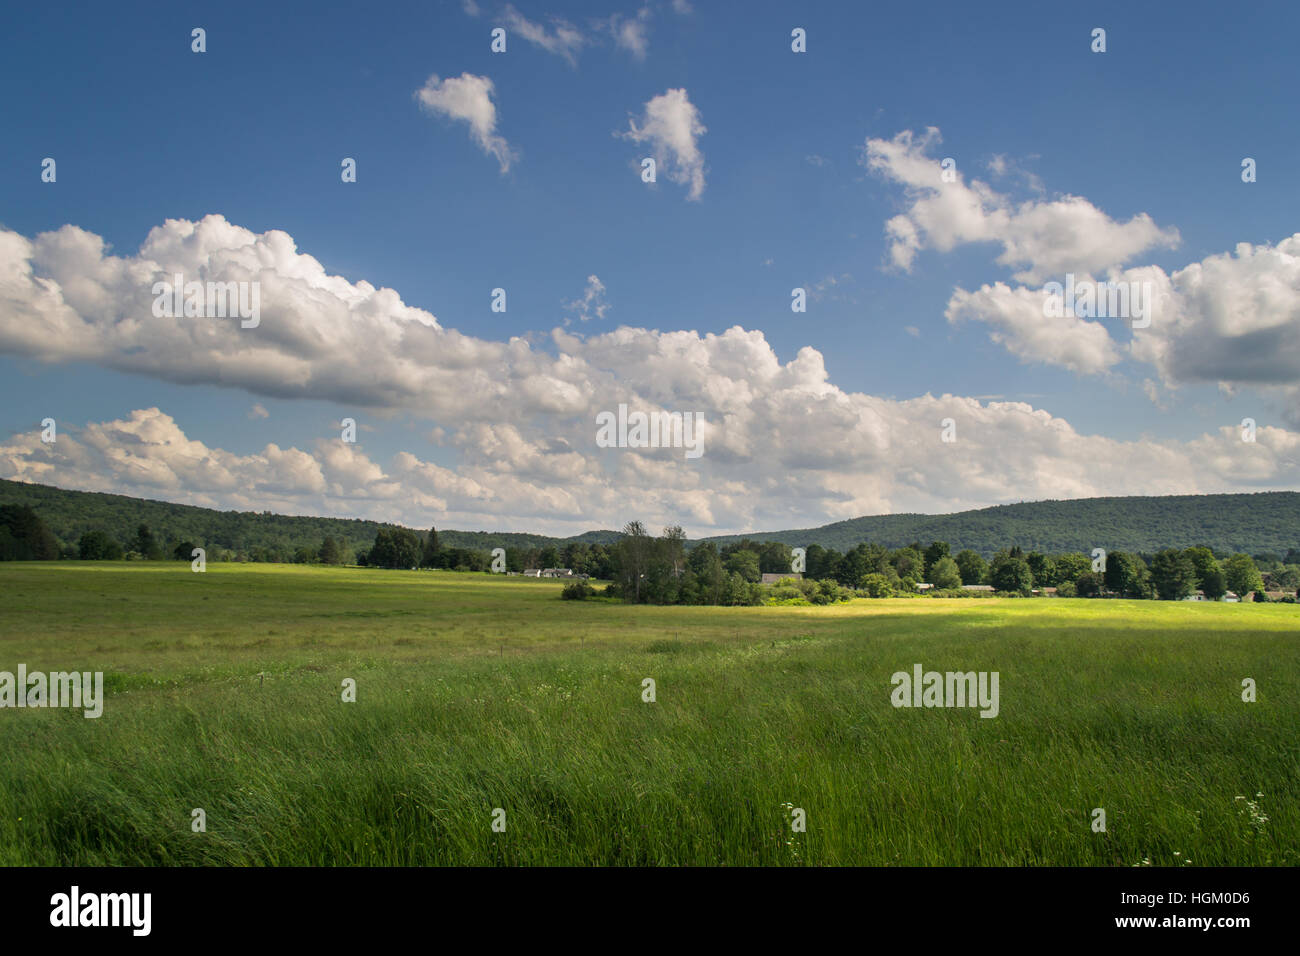 field on a partly cloudy day Stock Photo